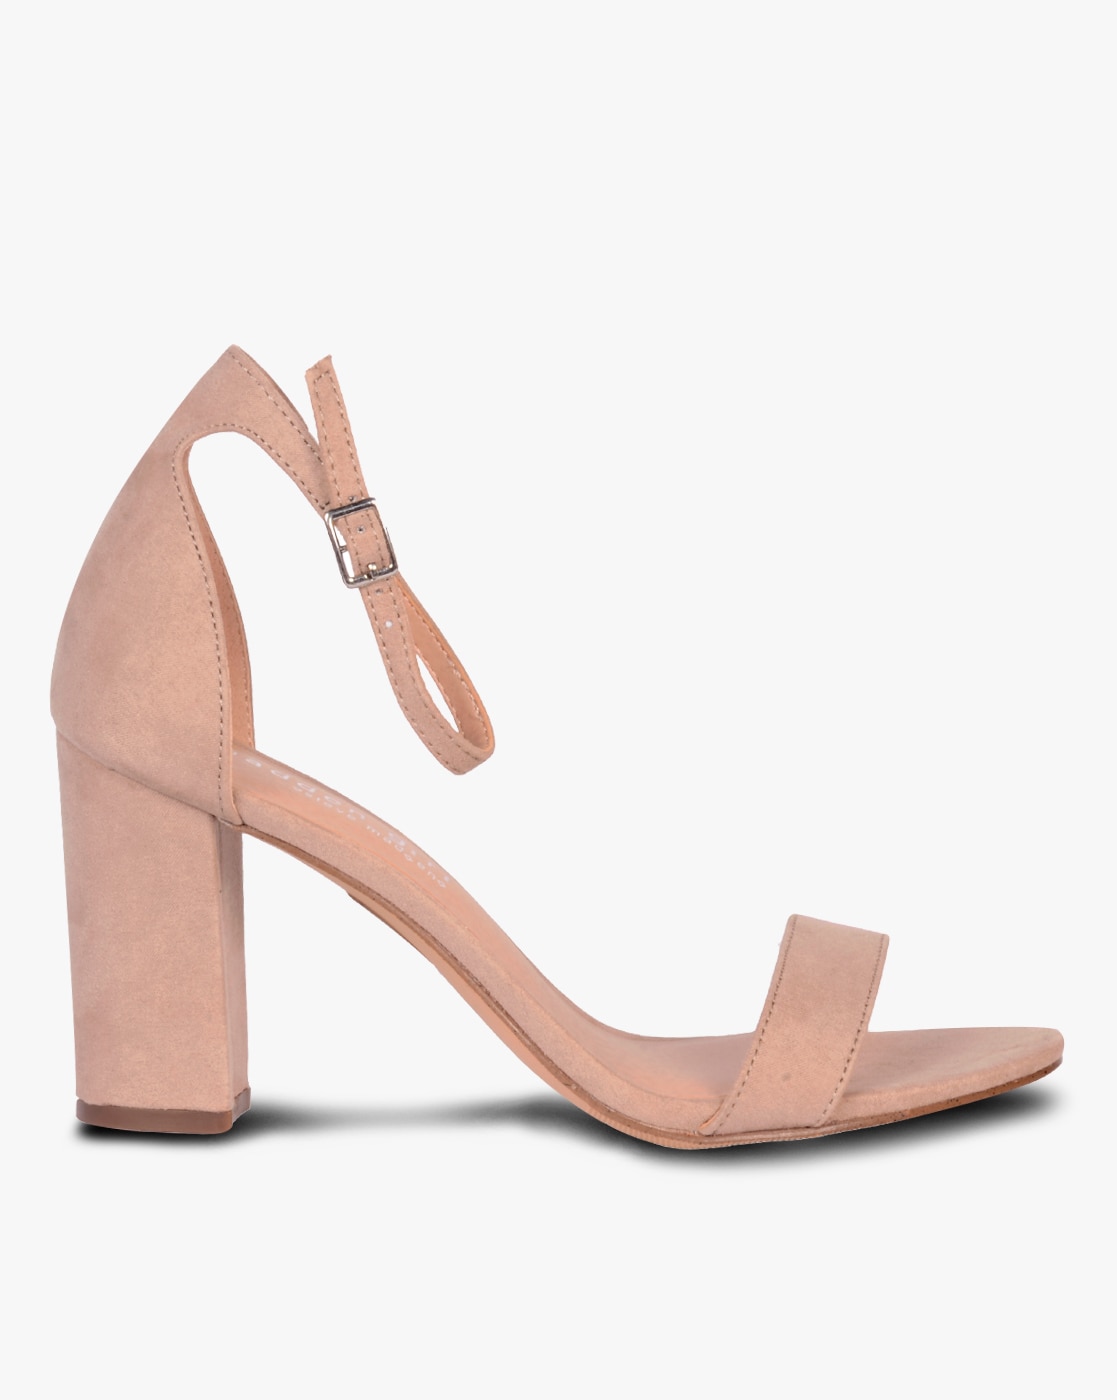 Buy Pink Heeled Sandals for Women by 